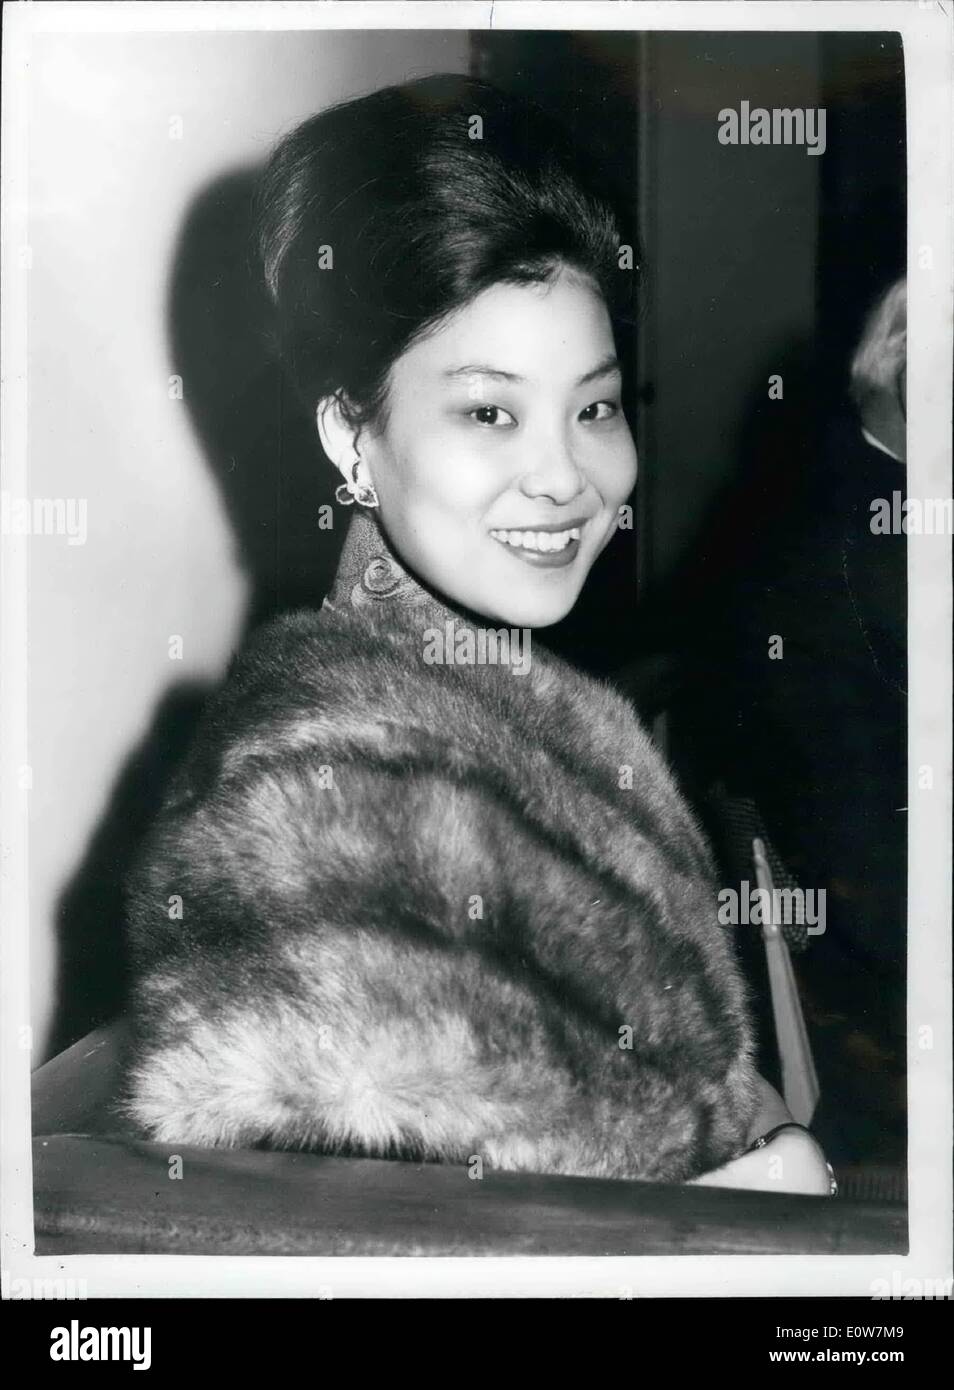 Jan. 01, 1962 - China's ''Mrs Dale'' at BBC display; A exhibition to present the various services of the BBC - called BBC Window of the world was opened this morning at the Charing Cross underground station in London. Attending was miss Doris Cheong, who works for the Chinese Section of the BBC External Services, and broadcast Miss Wong's Diary program which gives Chinese listeners a picture of life in Britain as seen through the eyes of a Chinese girl staying here. Photo Shows Miss Cheong at the opening ceremony this morning. Stock Photo